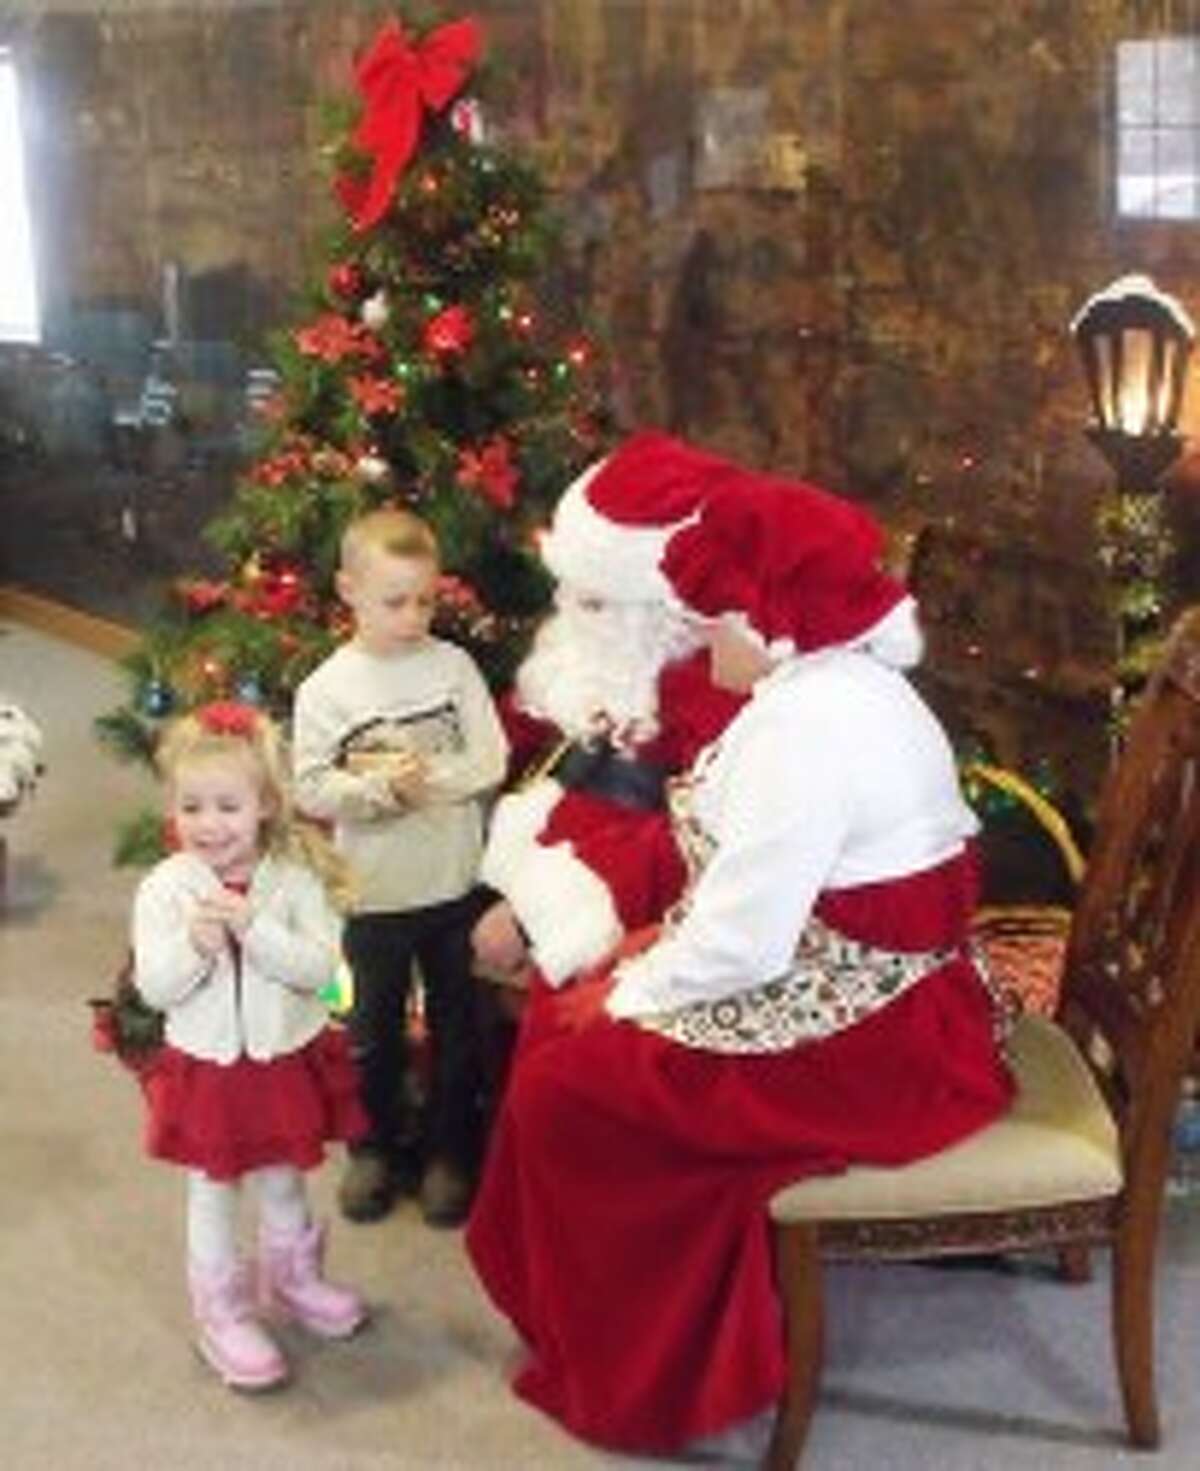 A LITTLE SHY: Hundreds of children waited in line to see Santa on Saturday during the annual Christmas in a Small Town in Evart.